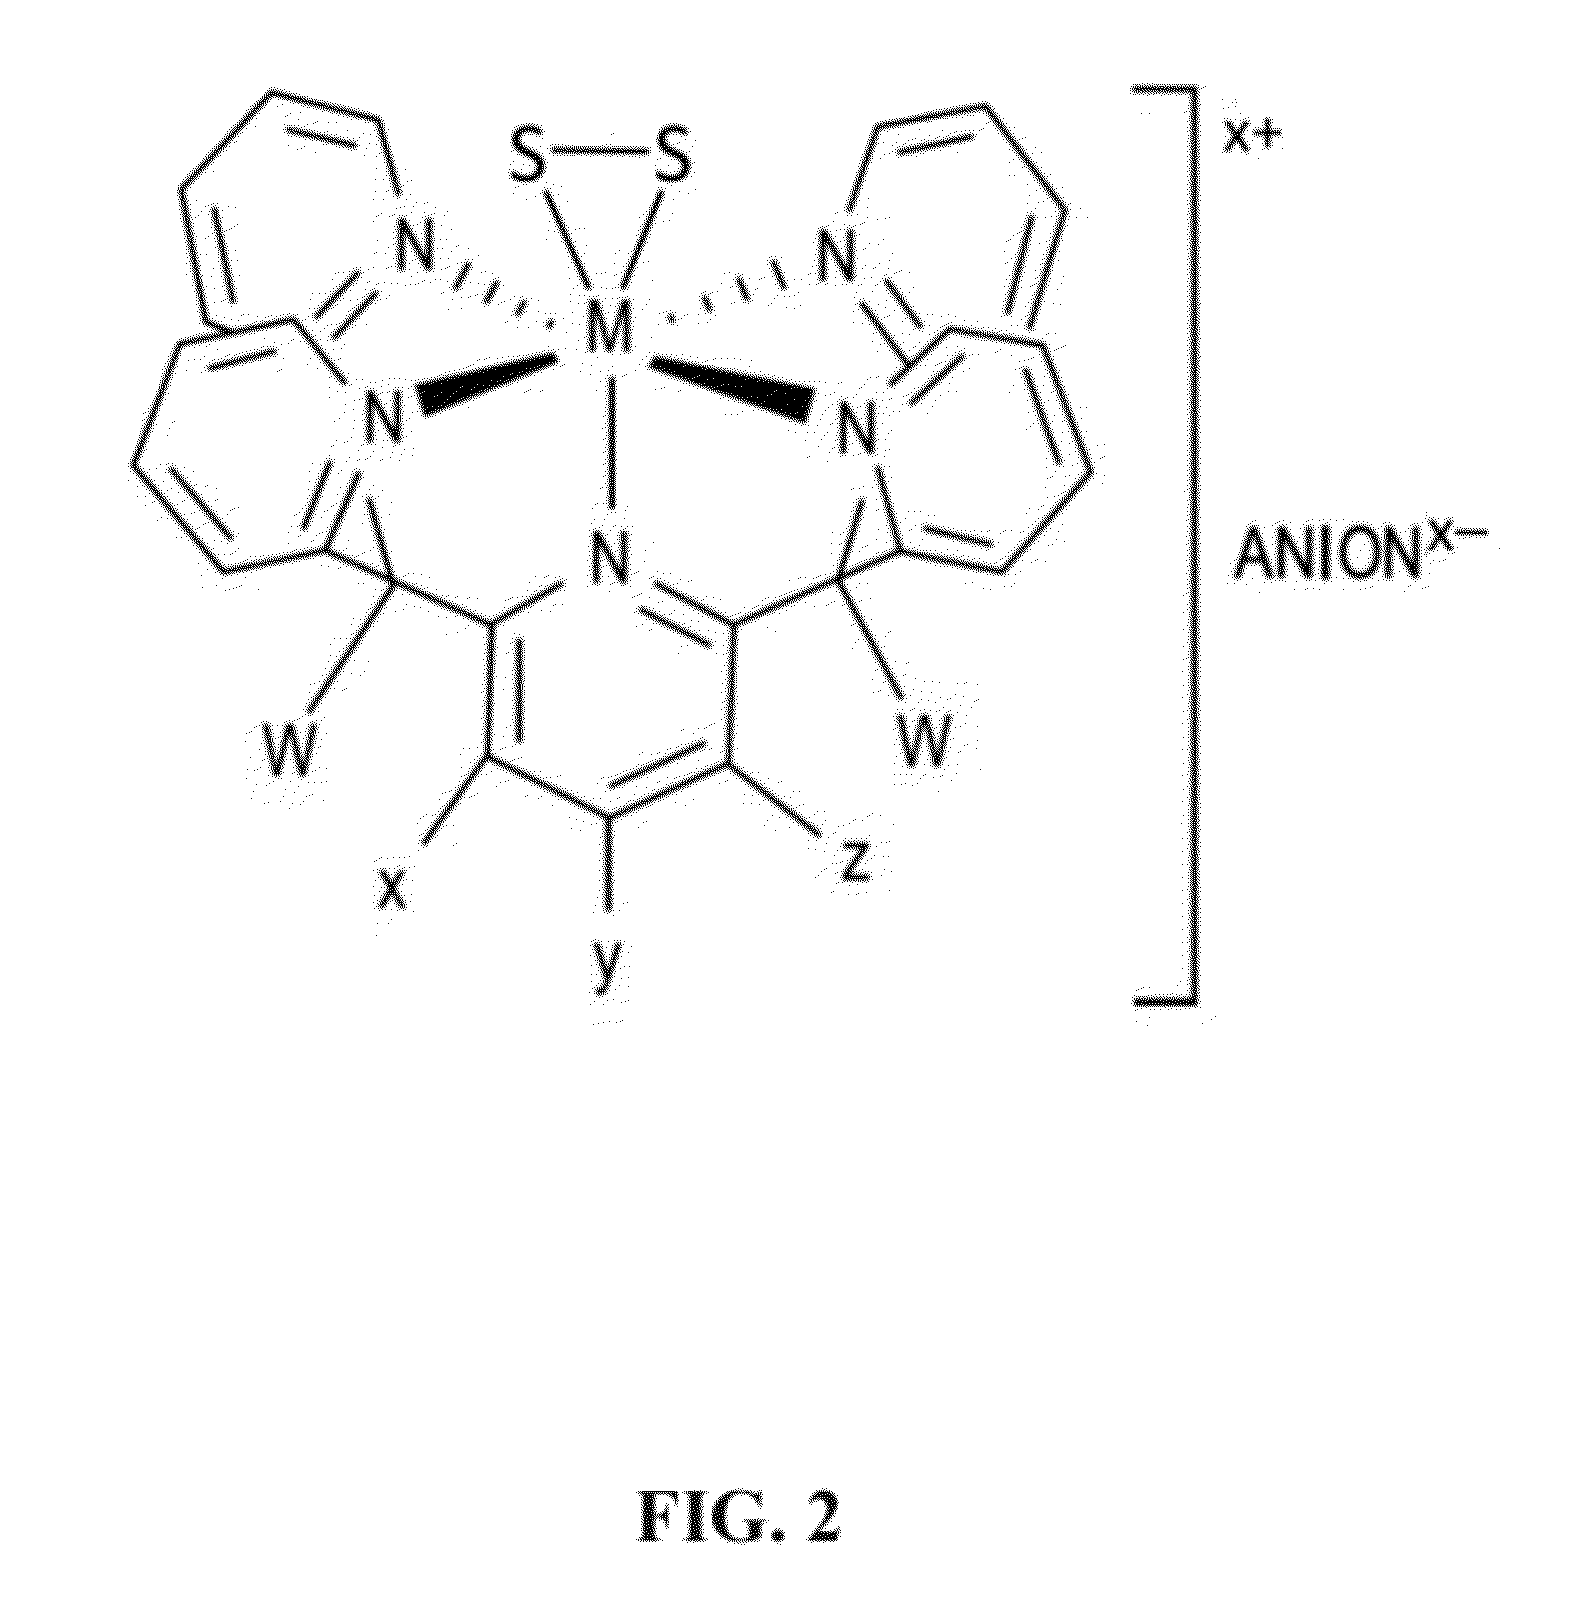 Molecular Molybdenum Persulfide and Related Catalysts for Generating Hydrogen from Water